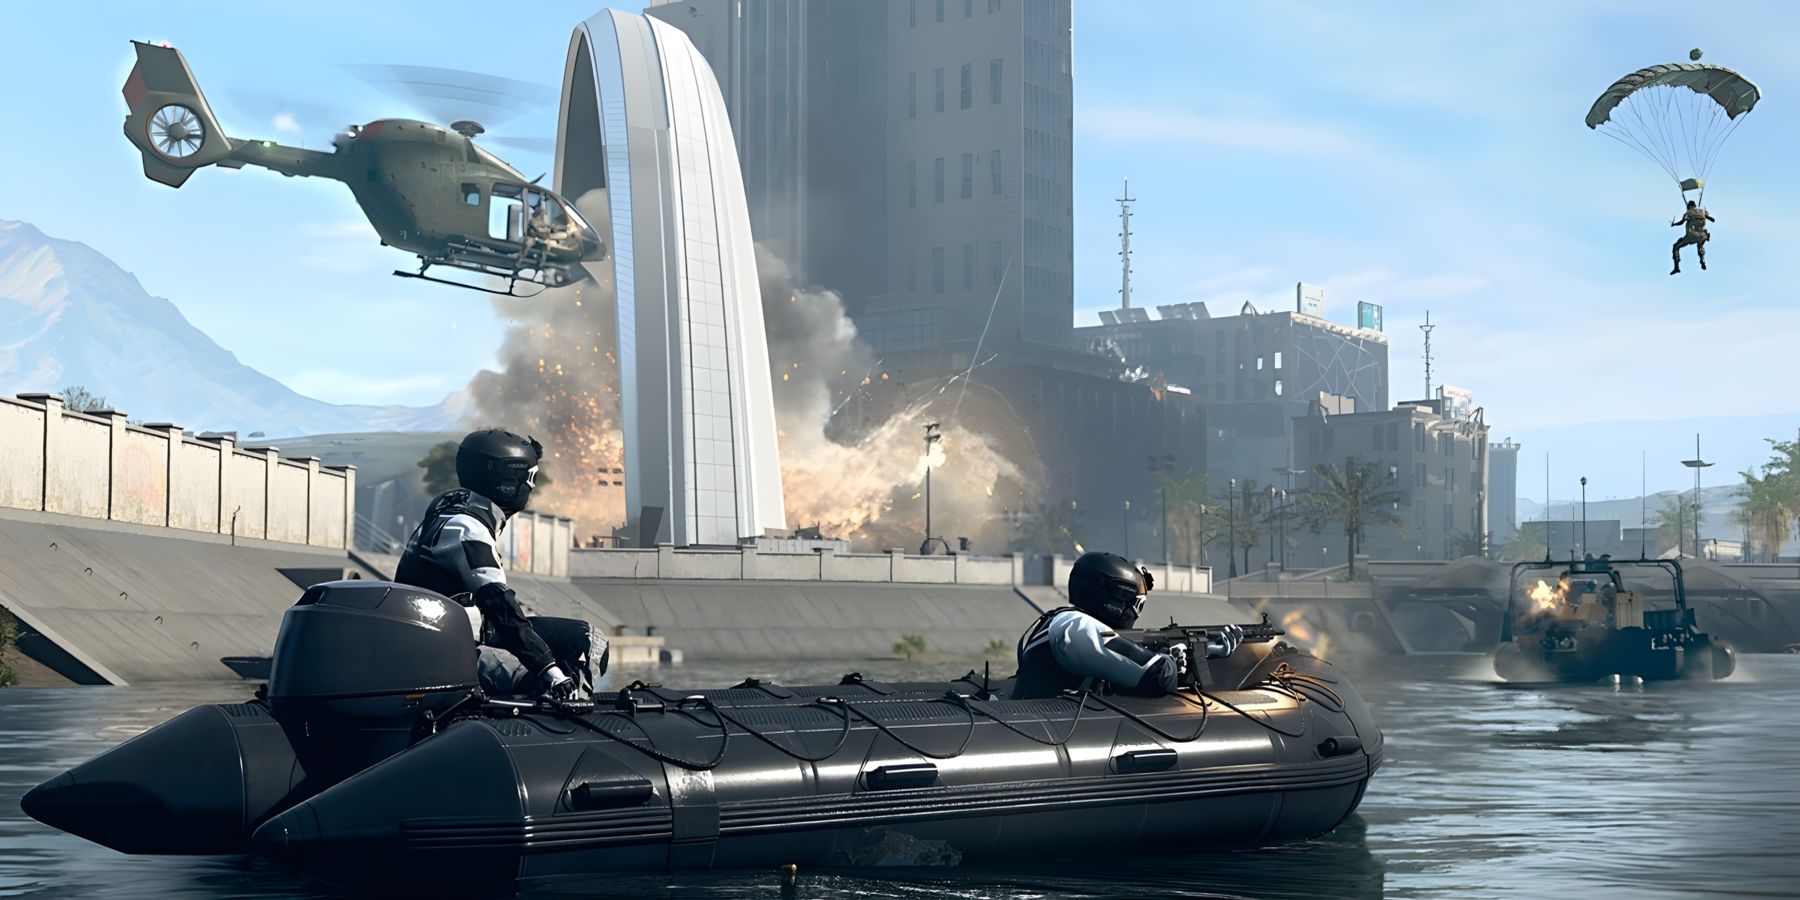 Funny Call of Duty: Warzone 2 Clip Shows Epic Moment Being
Ruined